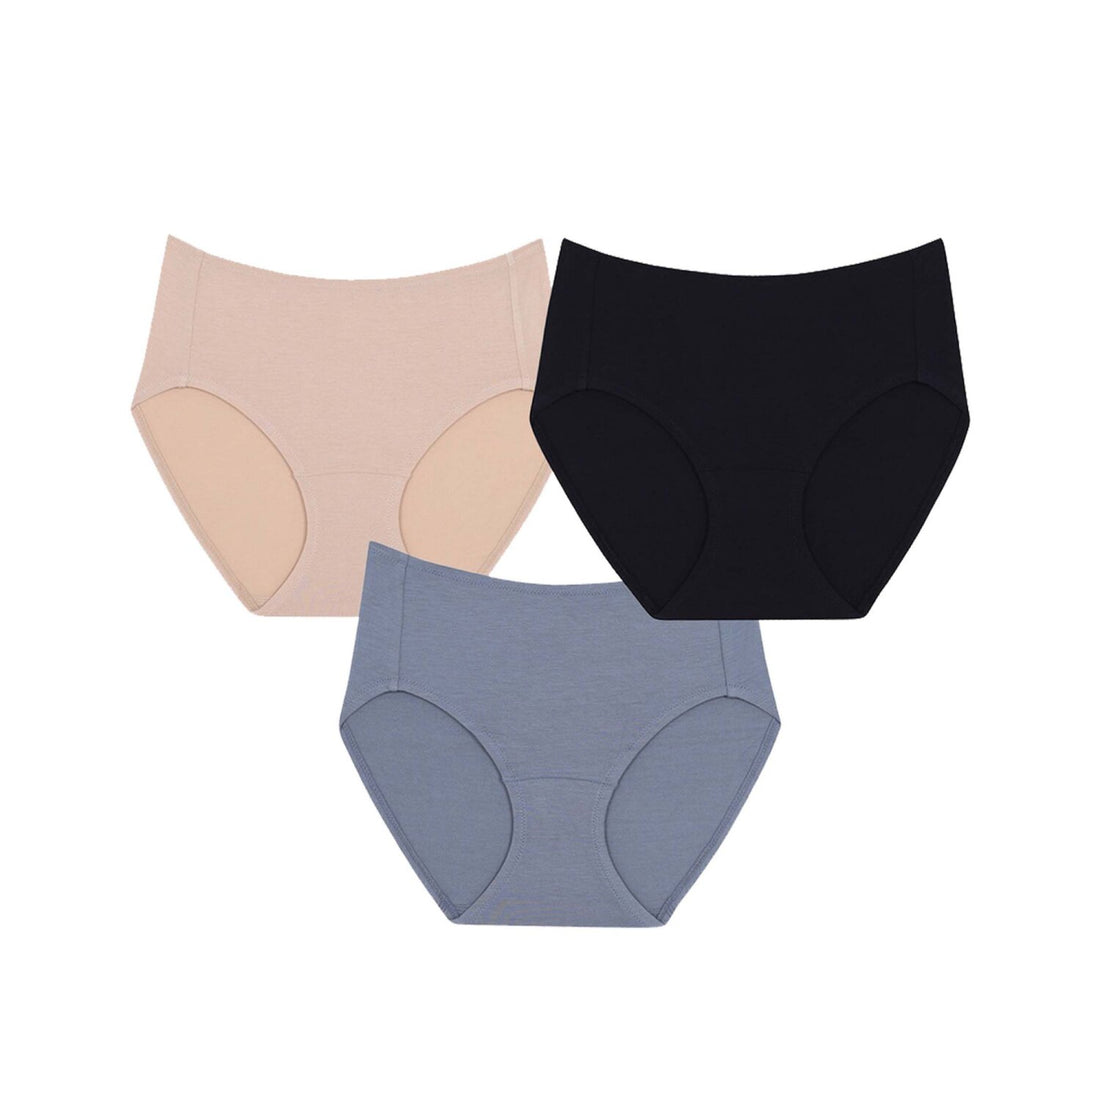 Wacoal Oh my nudes panty seamless underwear, smooth, full body, set of –  Thai Wacoal Public Company Limited